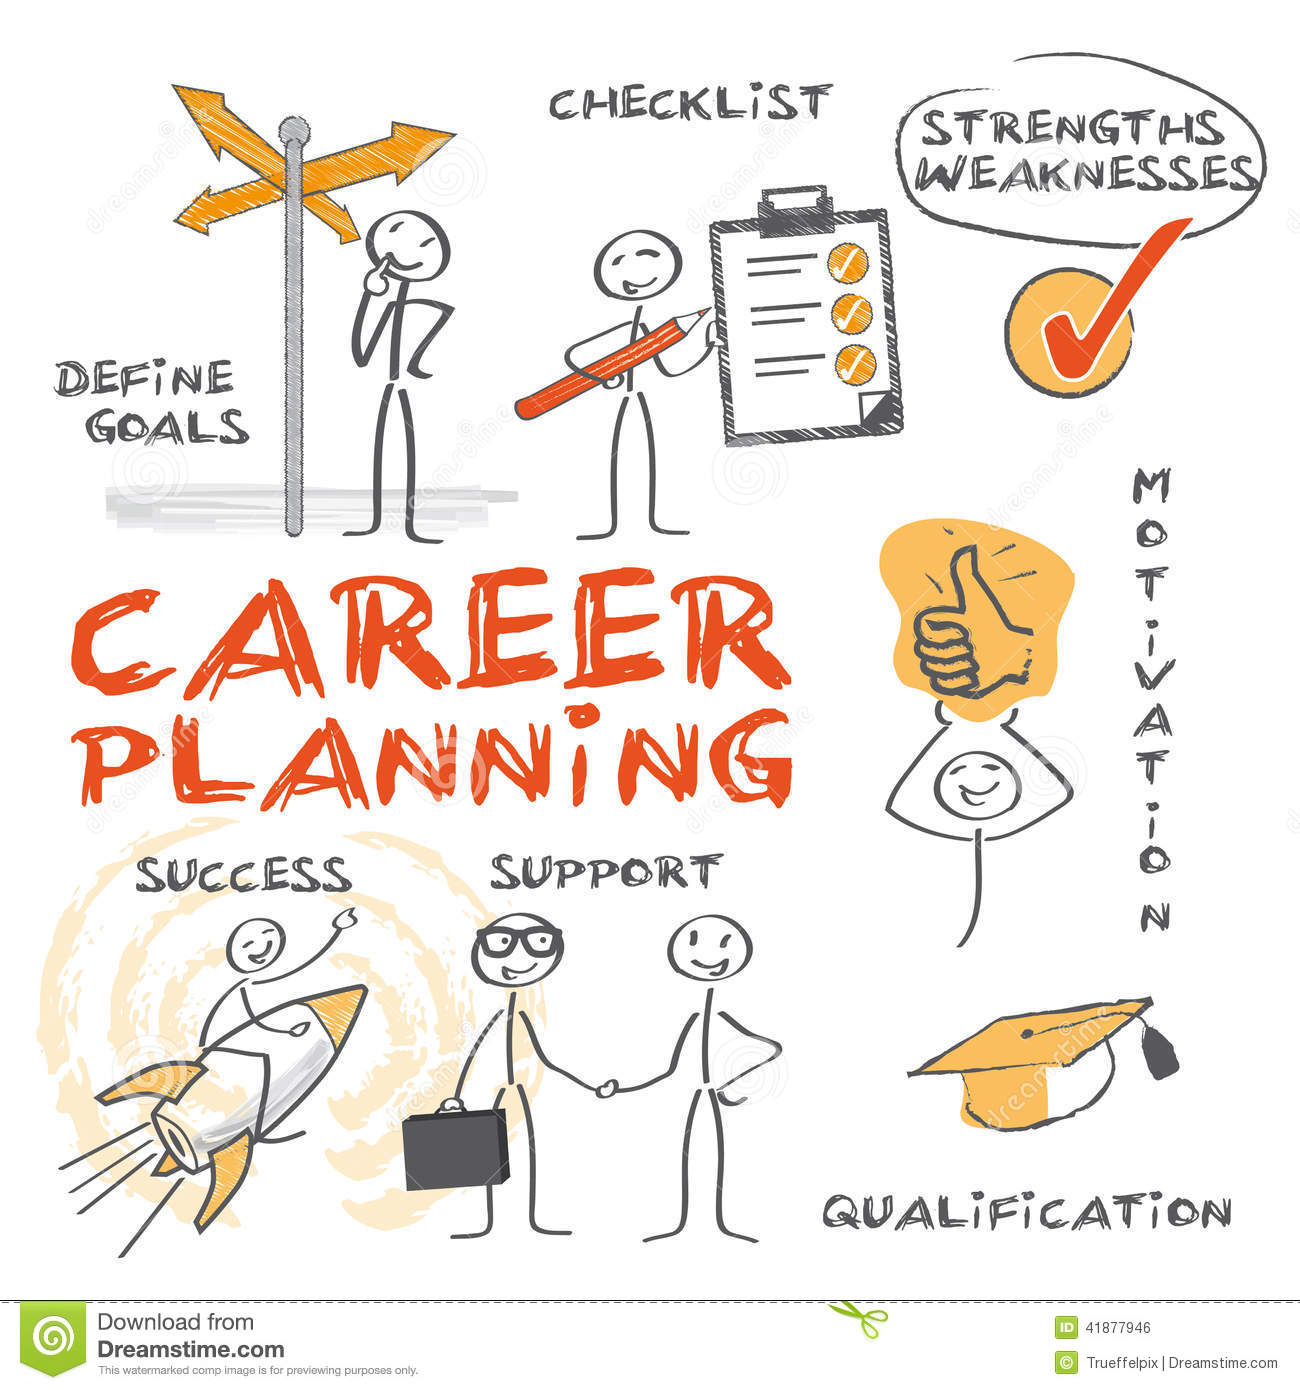 Career Planning  Chart With Keywords And Hand Drawn Figures